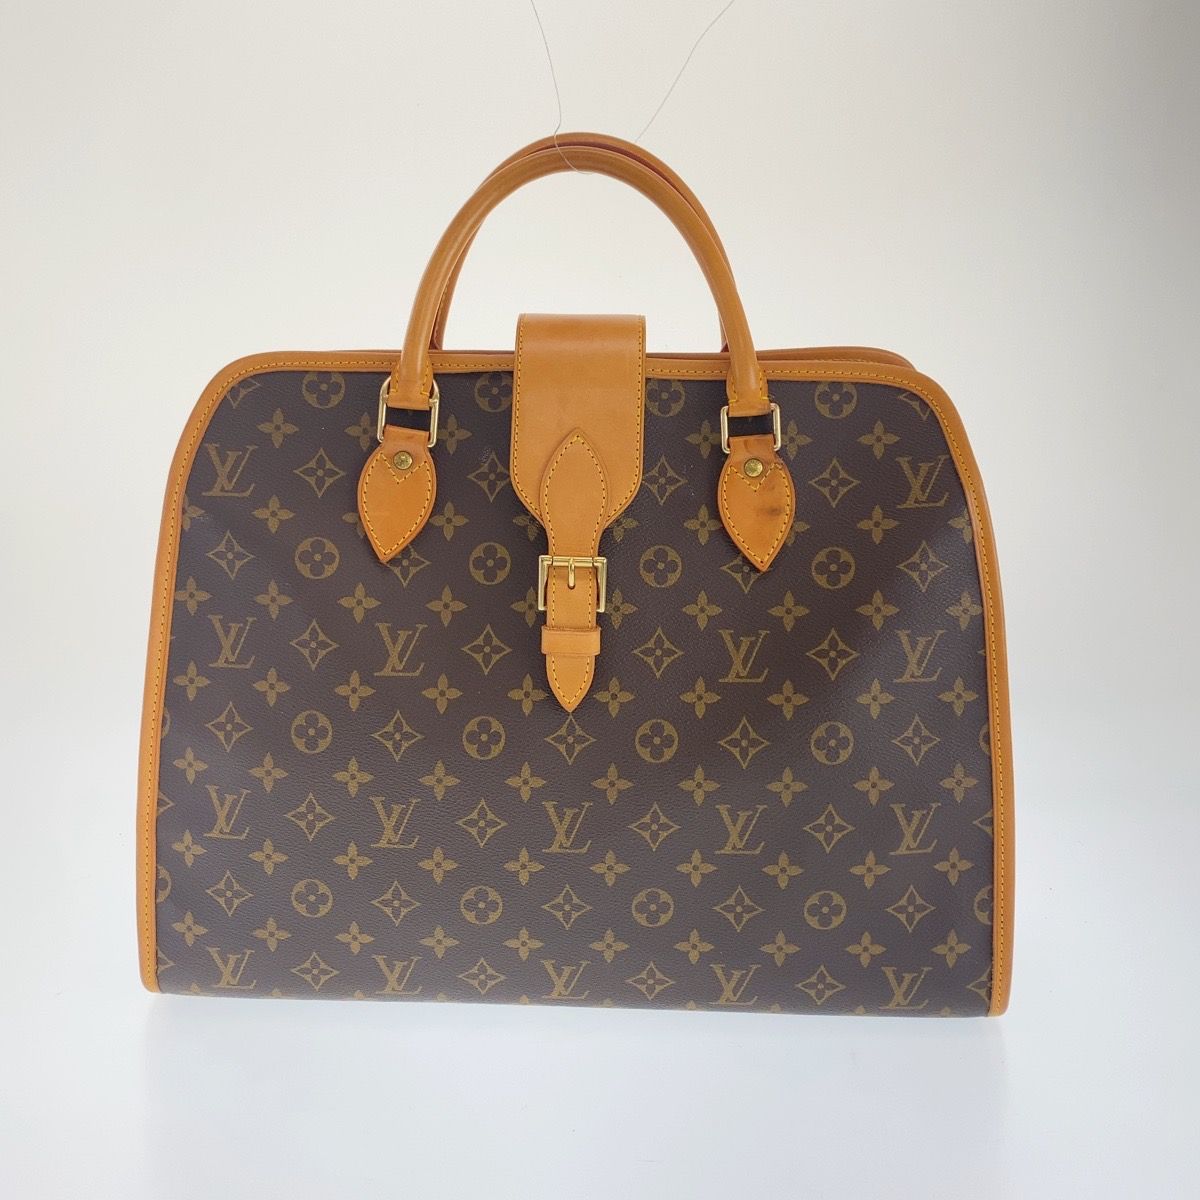 LOUIS VUITTON ルイヴィトン モノグラム リヴォリ ハンドバッグ 旅行